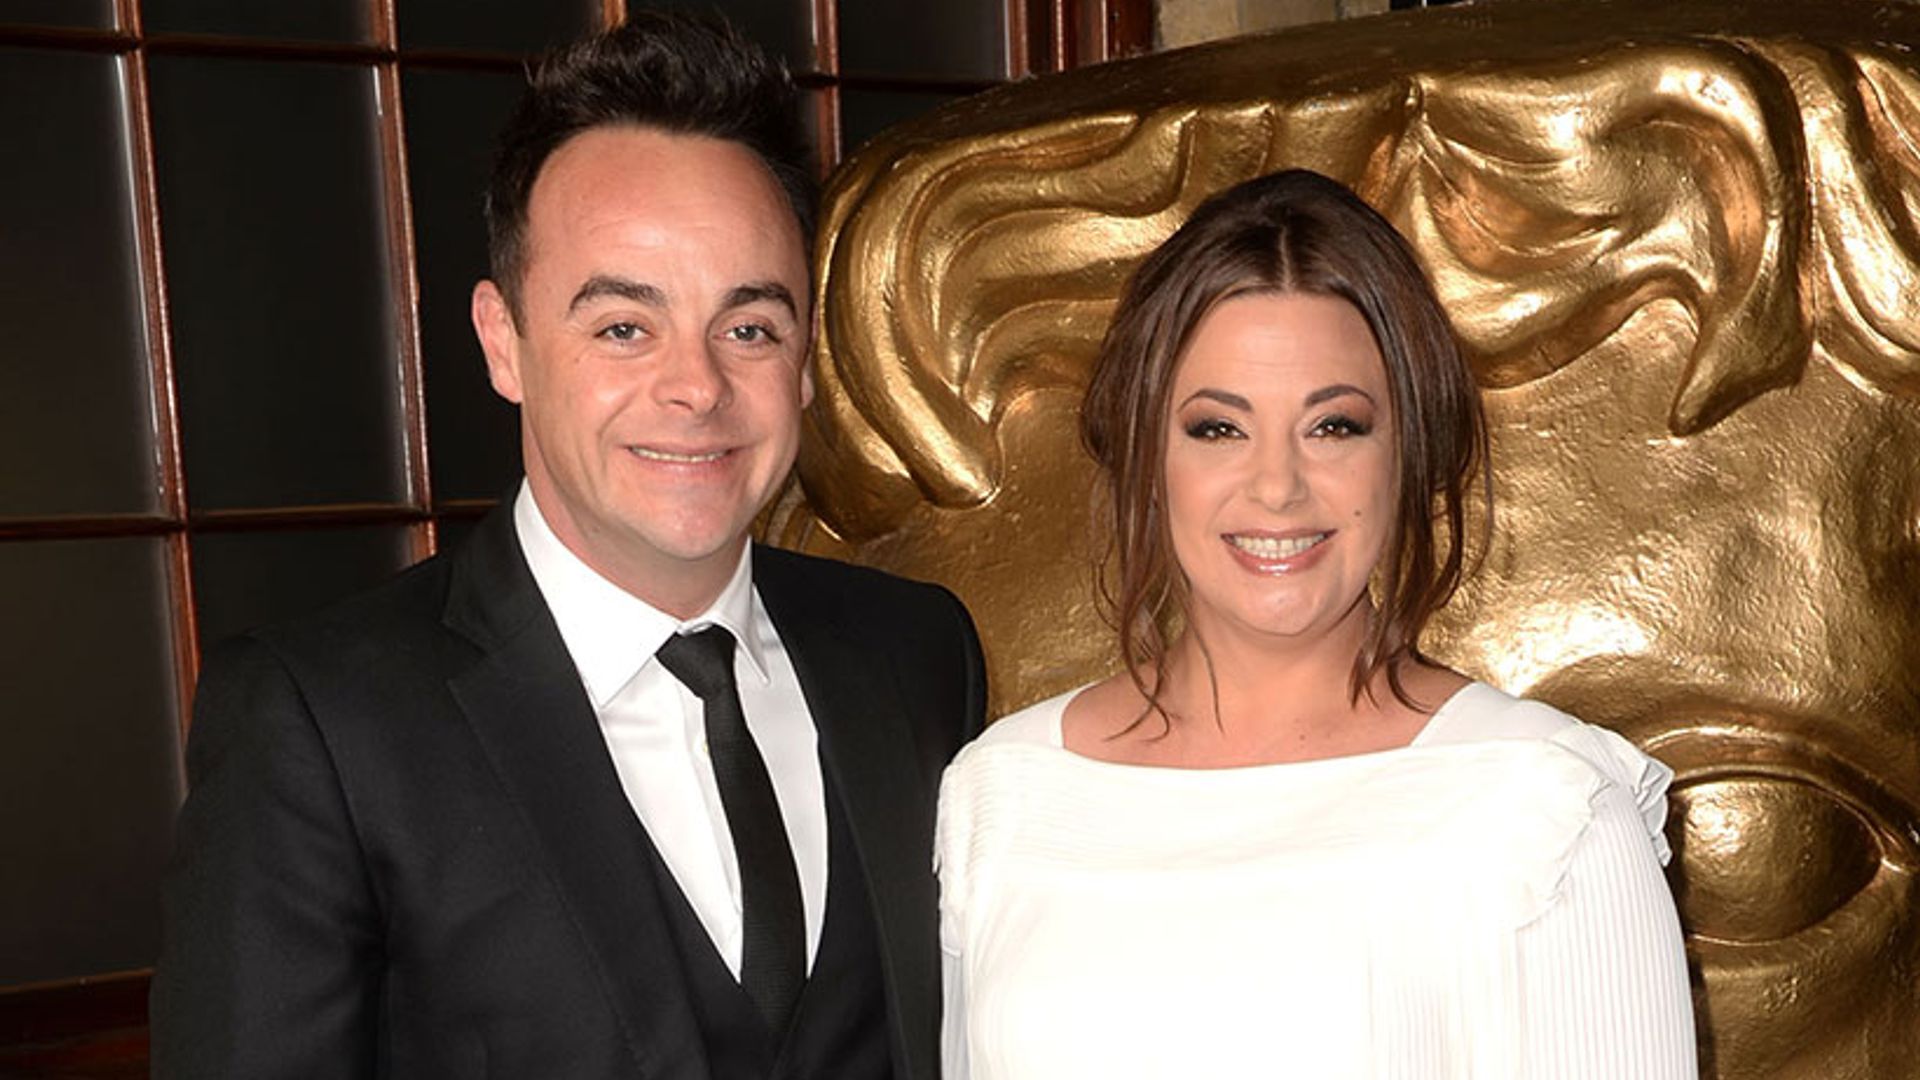 Image result for ant mcpartlin and wife